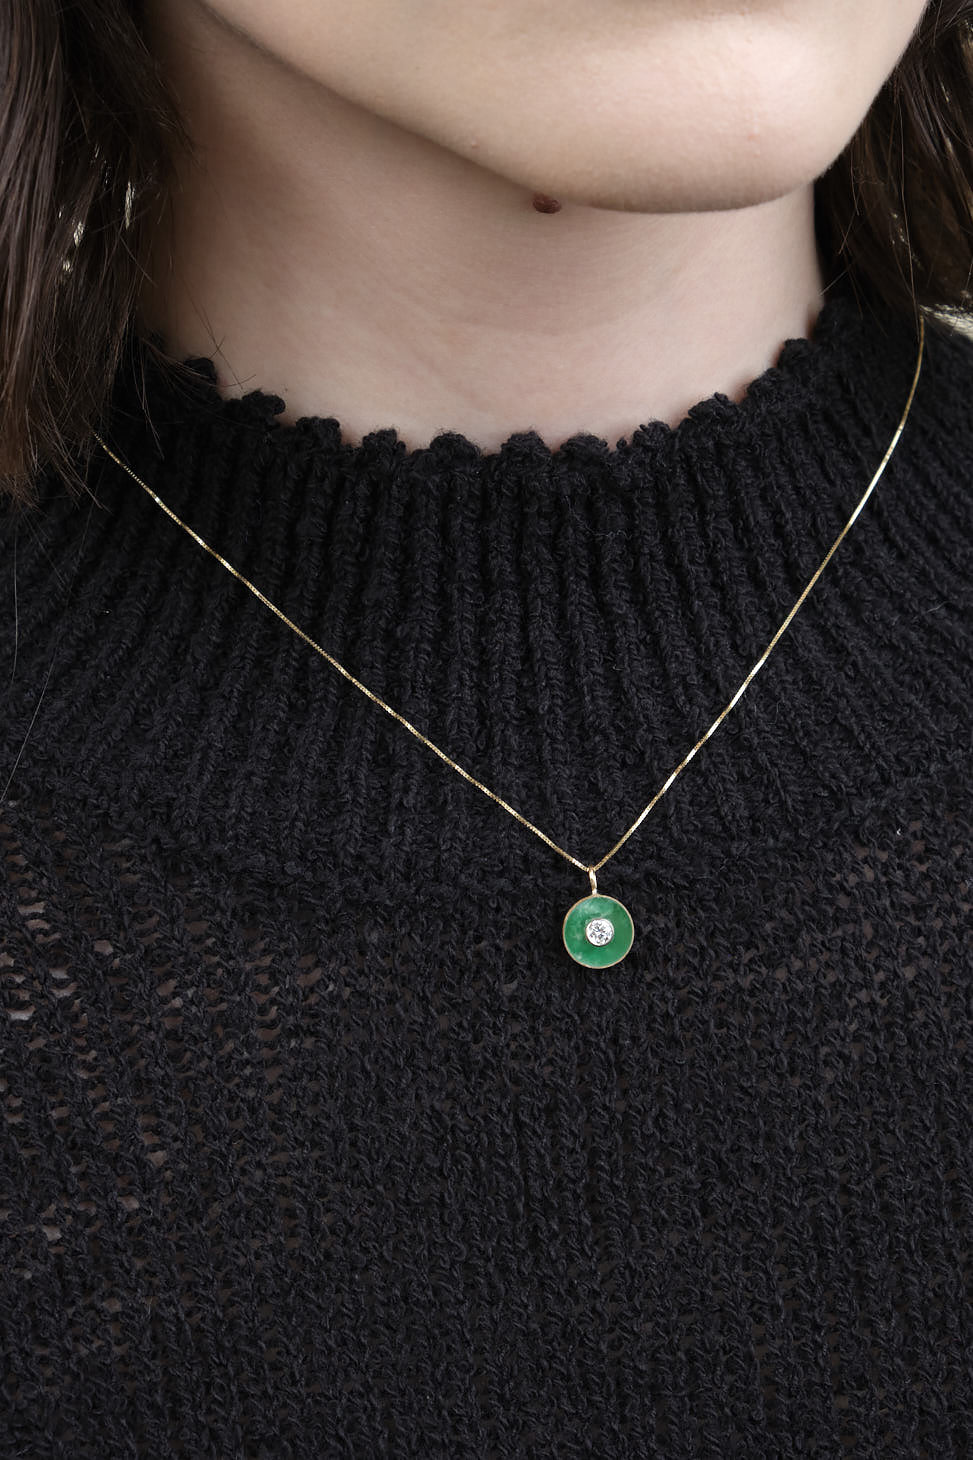 Cerclen Necklace in Kingman Gold Green Turquoise